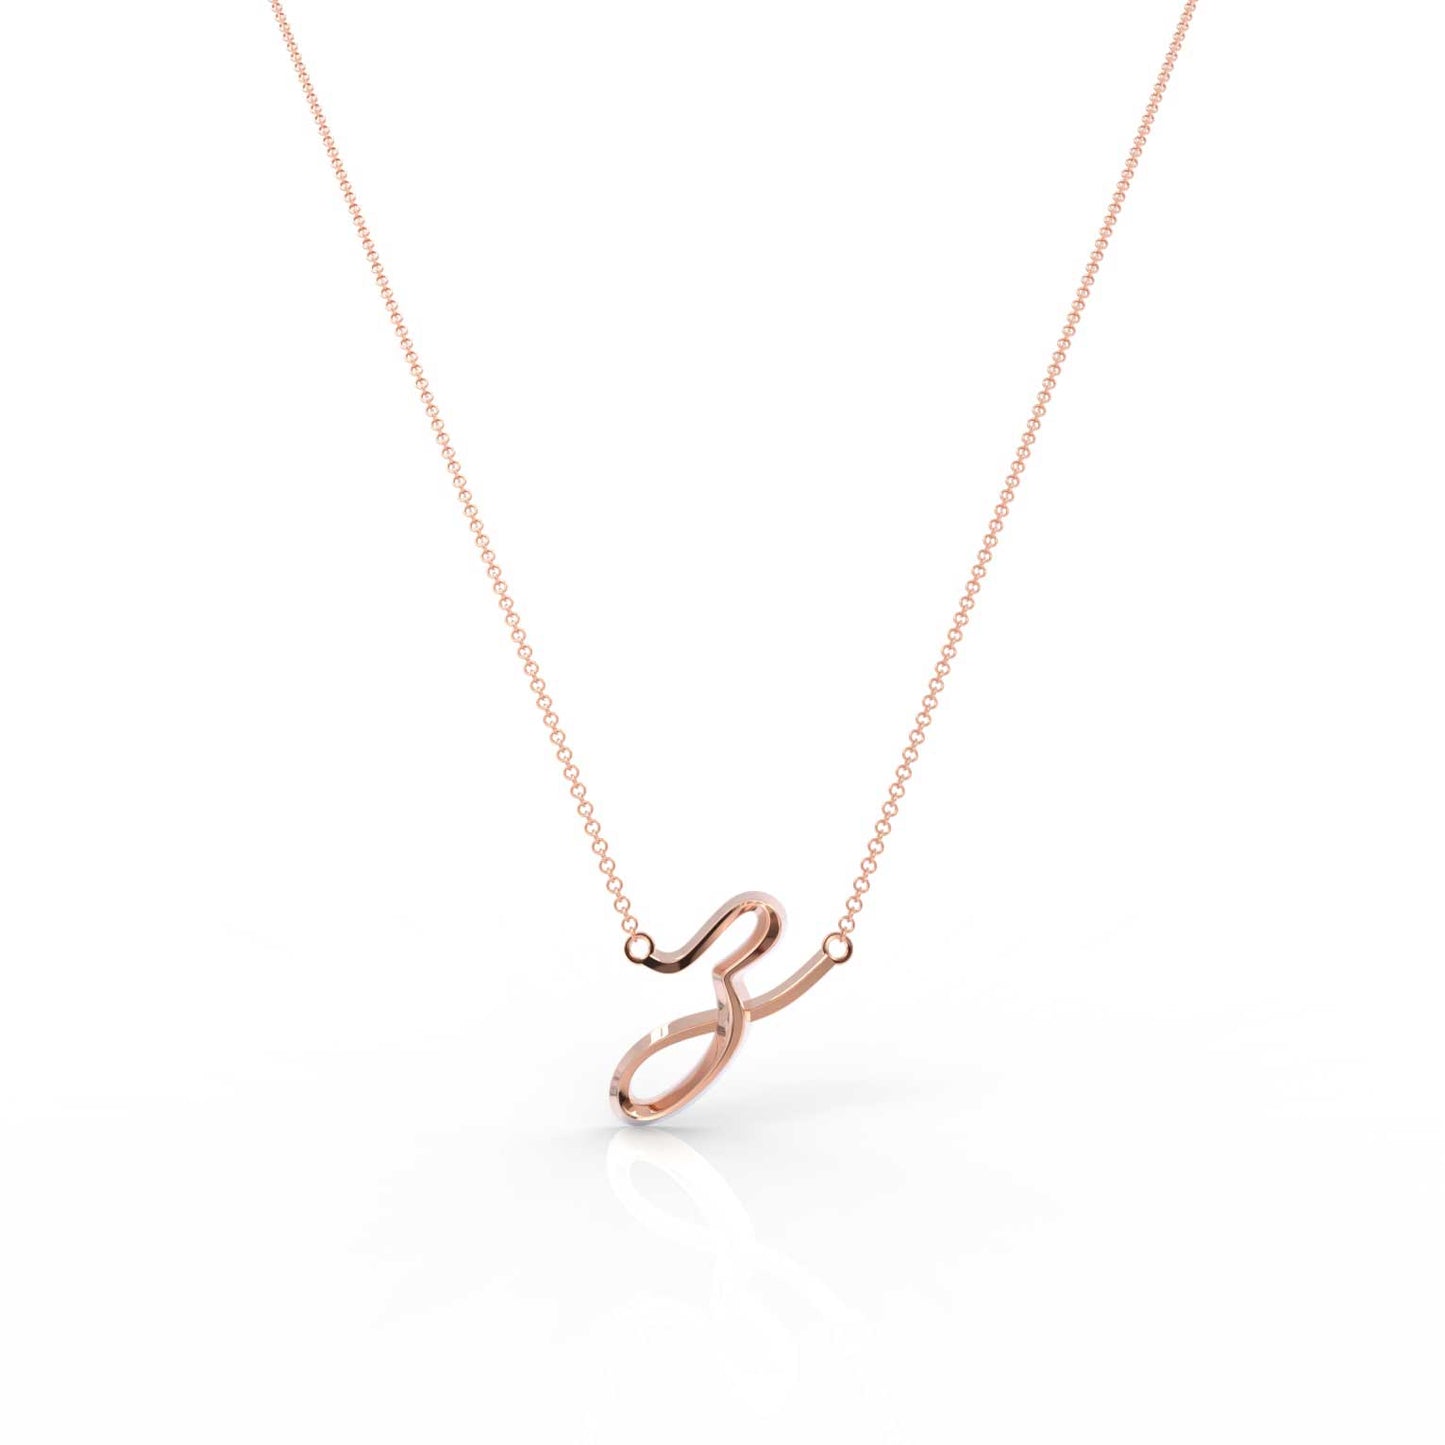 The Love Collect - "Z" Necklace